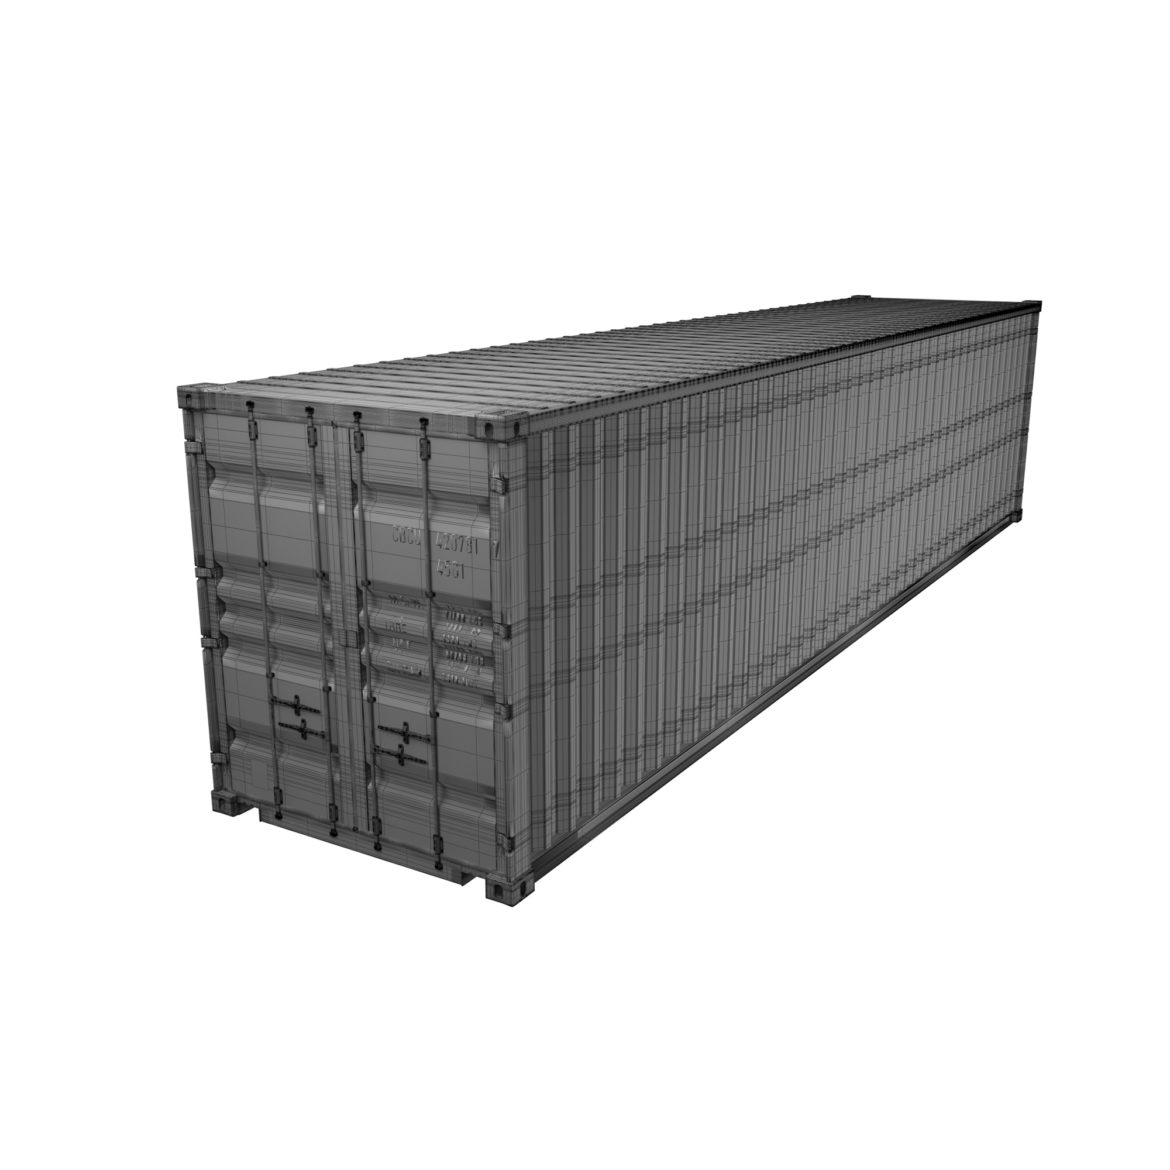  <a class="continue" href="https://www.flatpyramid.com/3d-models/architecture-3d-models/objects/container/shipping-containers-20ft-and-40-ft-high-cube/">Continue Reading<span> Shipping Containers-20ft and 40 ft High Cube</span></a>